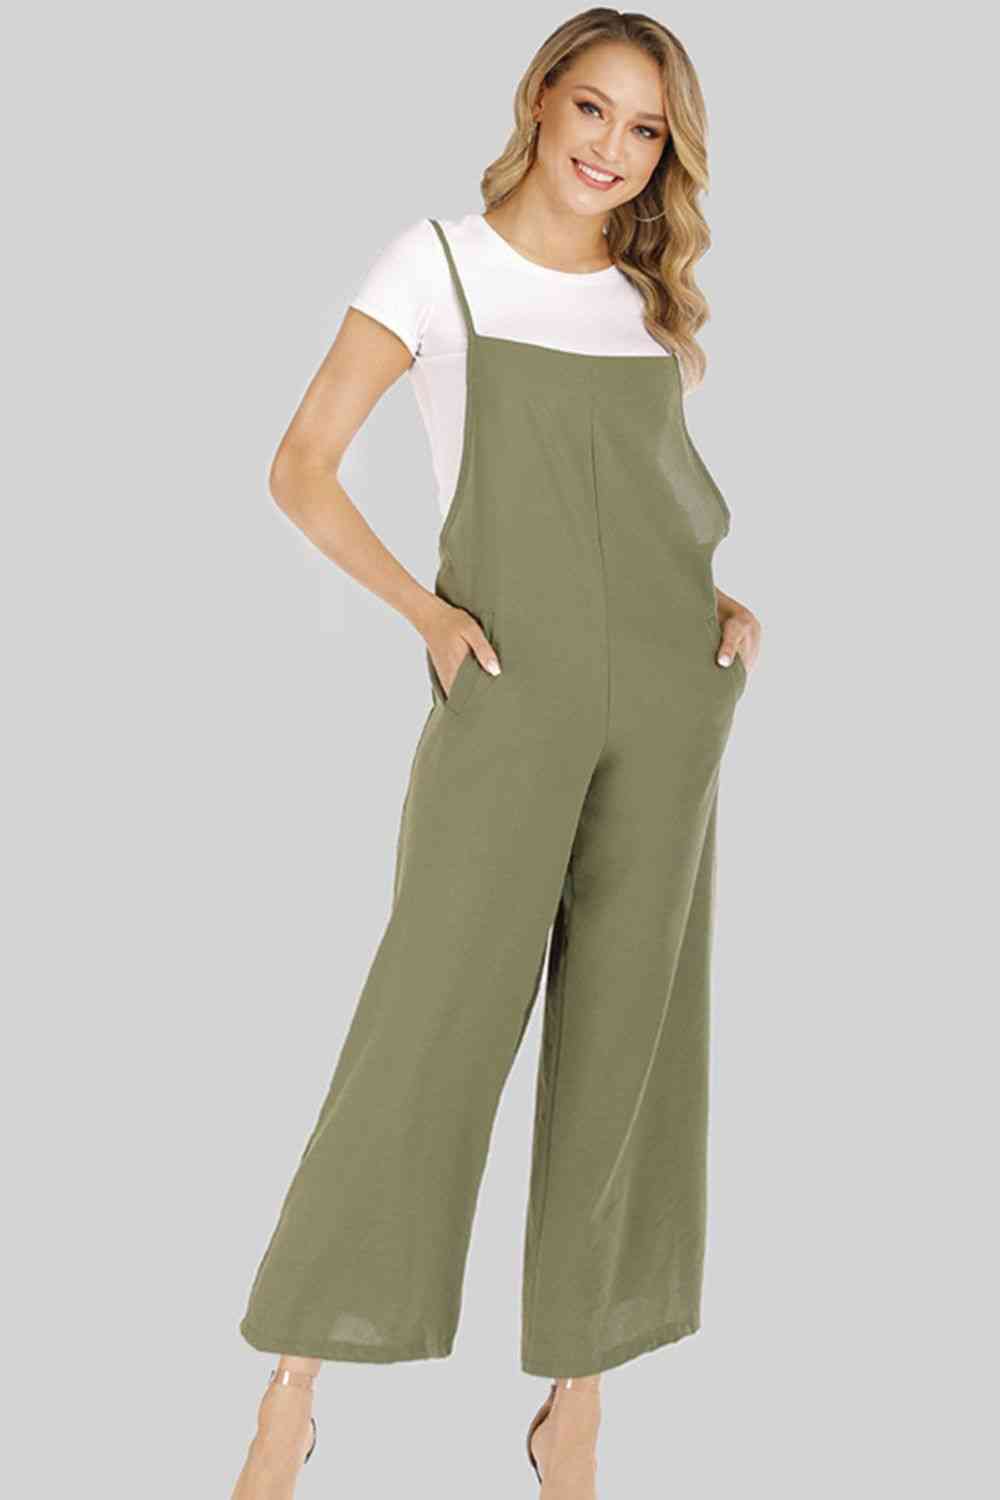 Full Size CoverTheBasics Cropped Wide Leg Overalls with Pockets